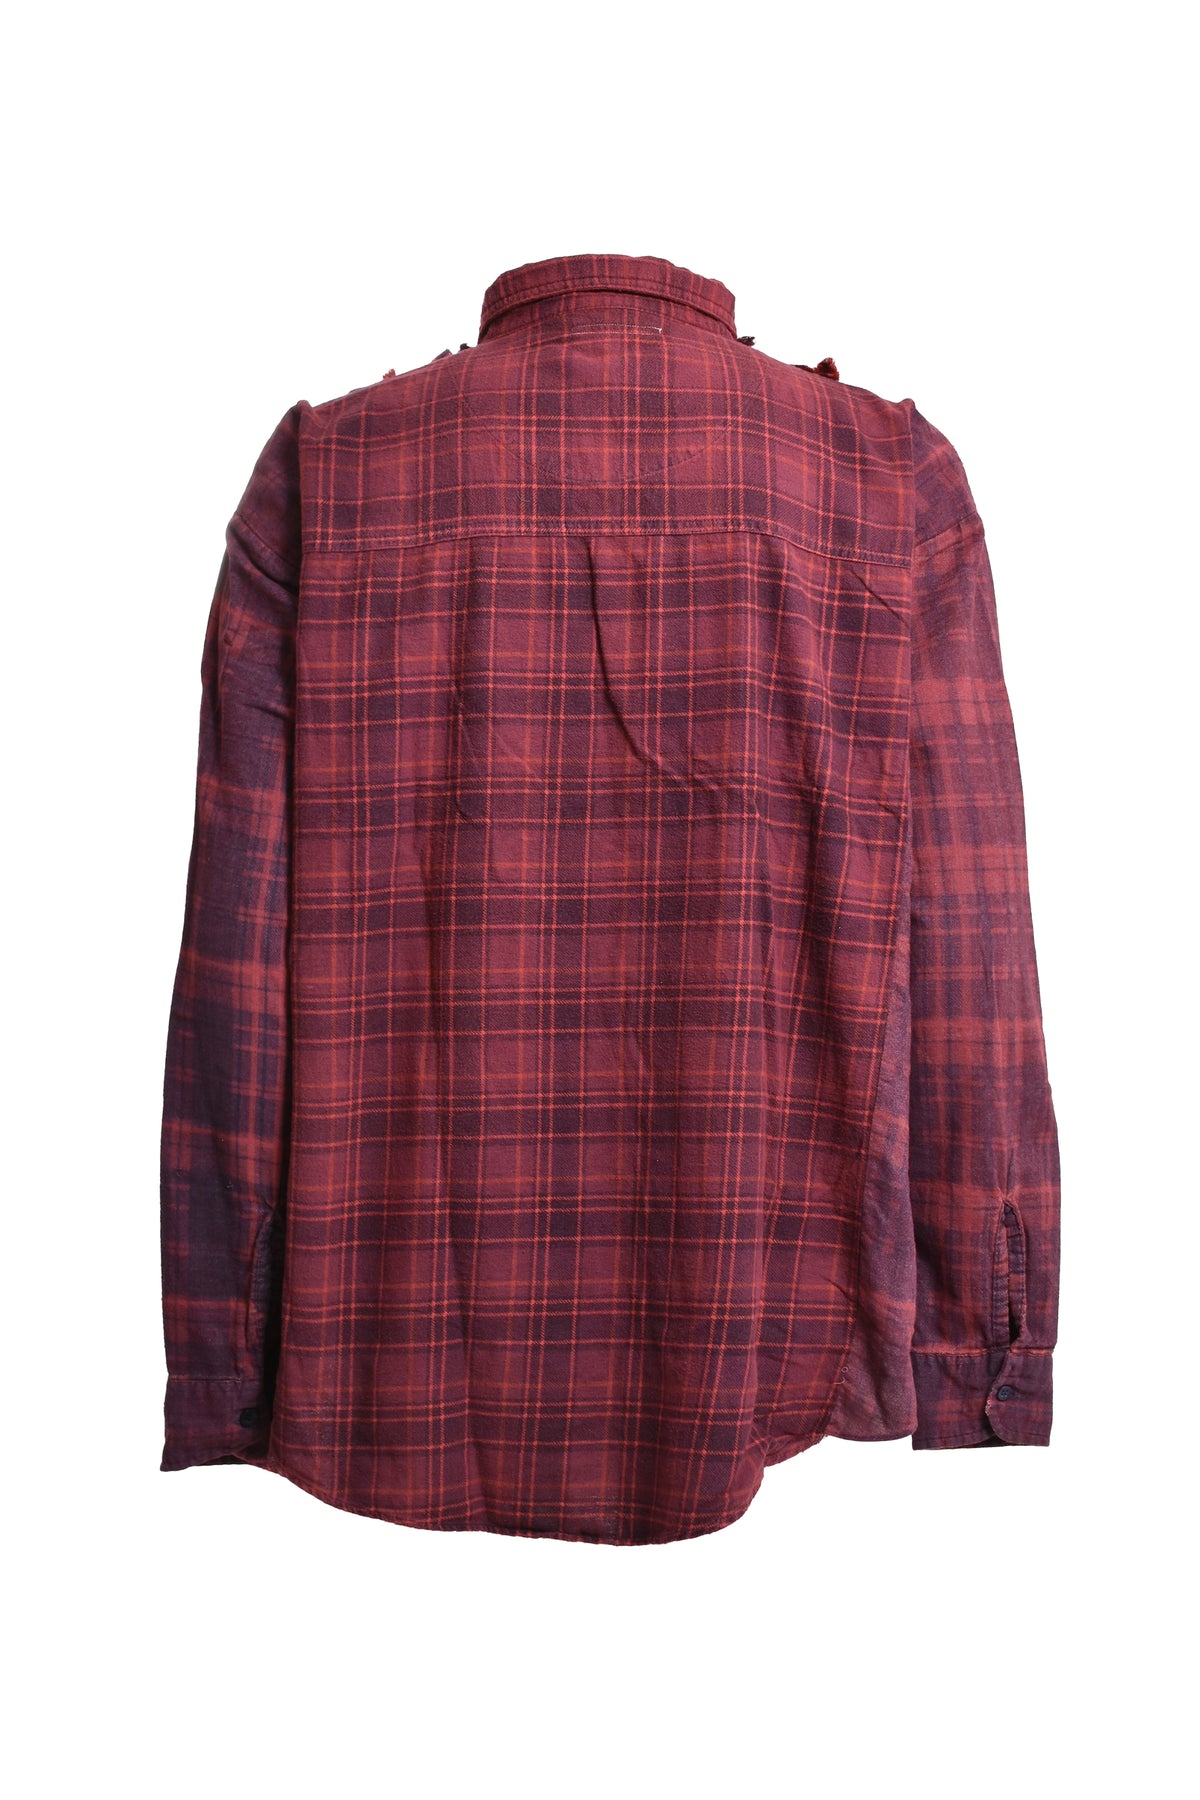 FLANNEL SHIRT -> RIBBON WIDE SHIRT / OVER DYE / RED